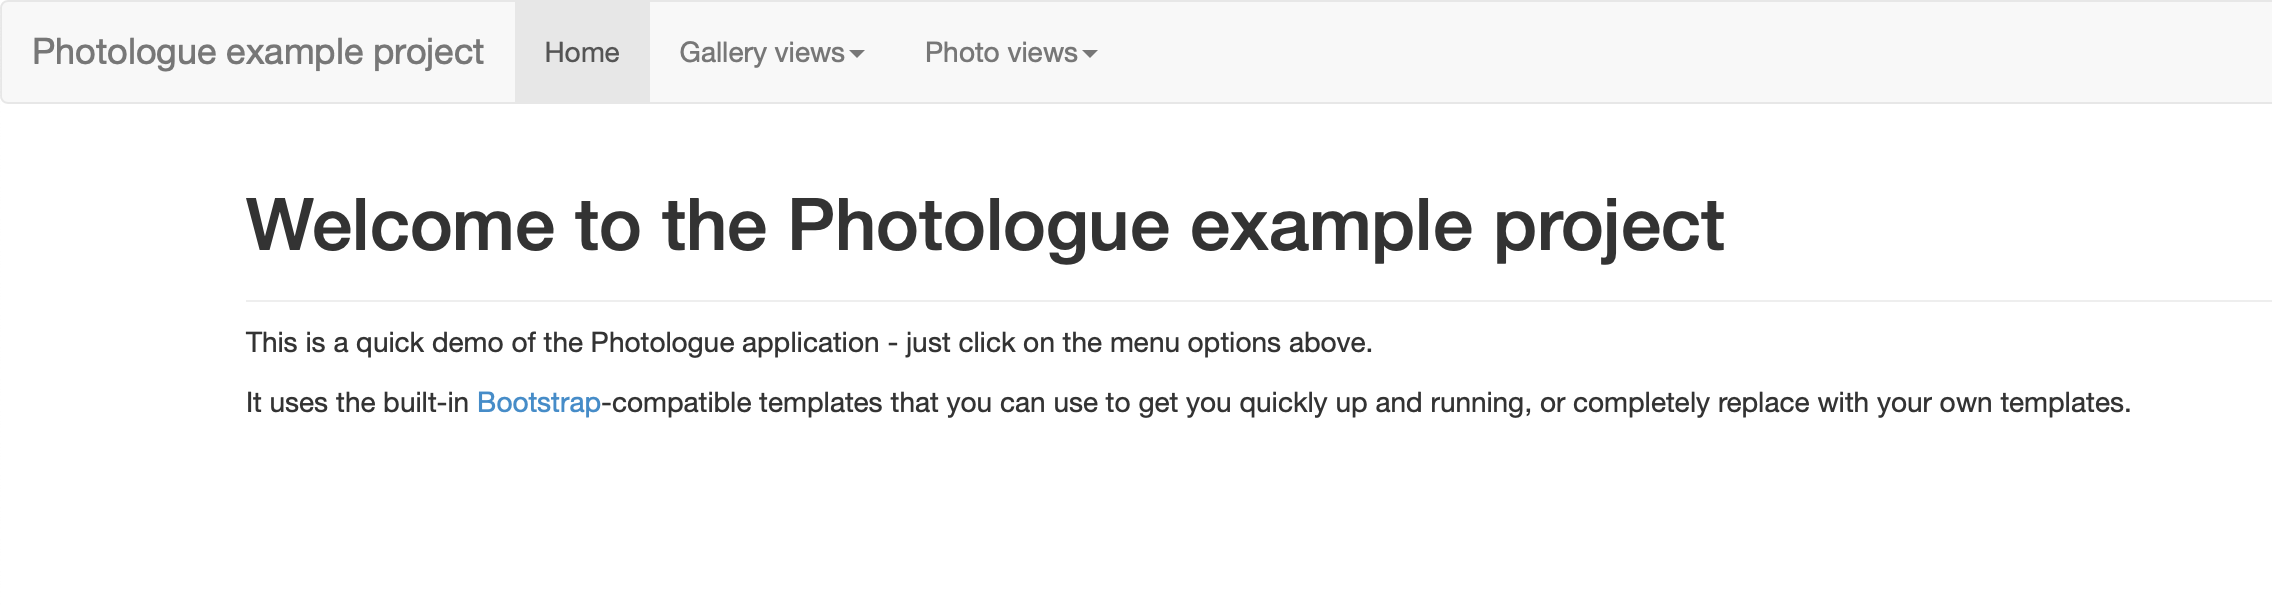 'Django Photologue with no galleries or images'